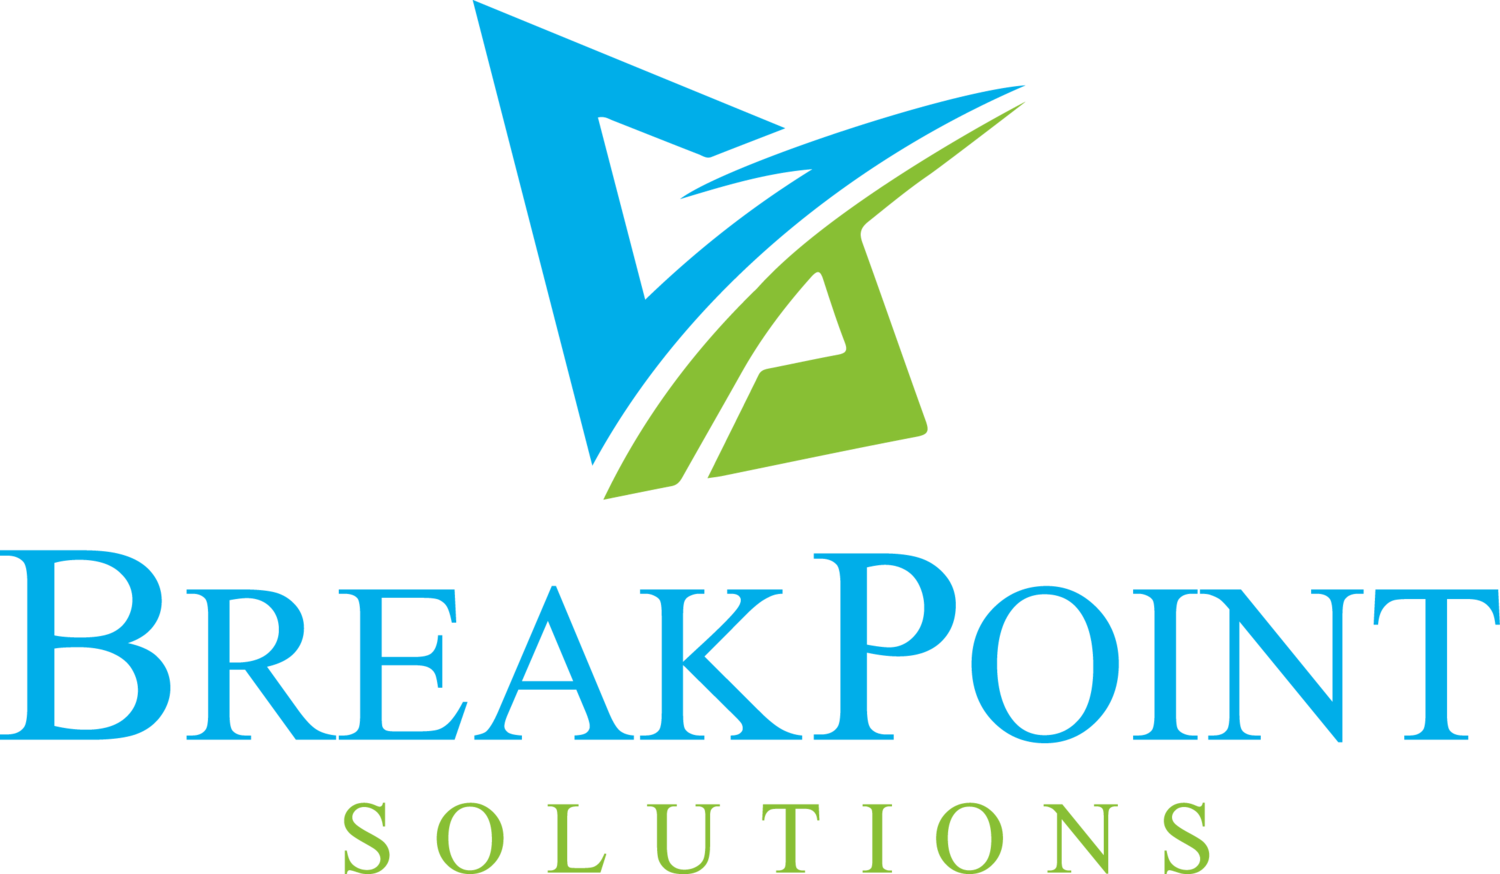 Breakpoint Solutions